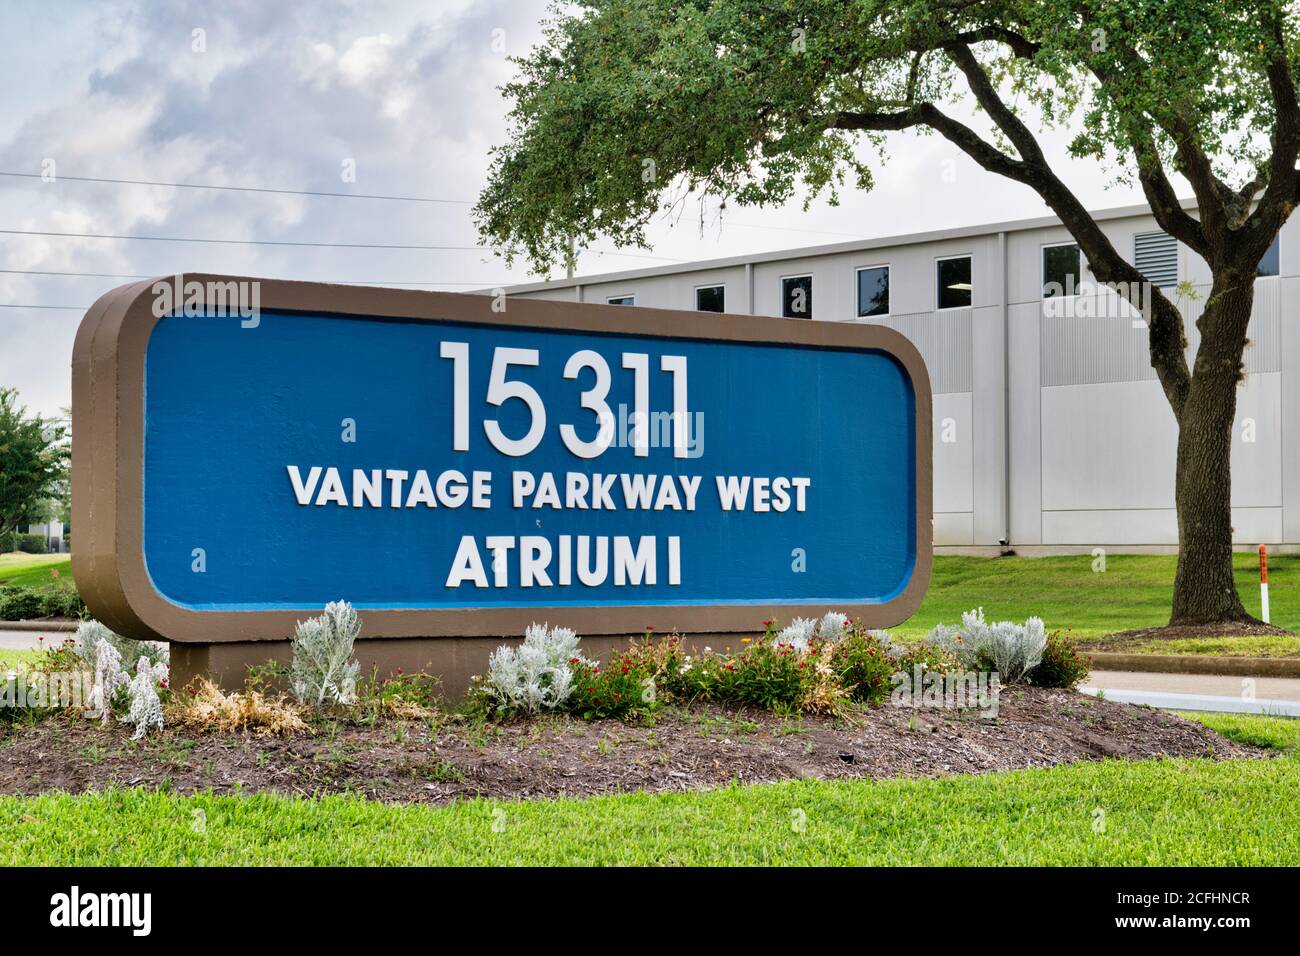 Houston, Texas/USA 07/17/2020: Atrium 1 address sign  in front of a Greater Greenspoint business park consisting of office spaces. Stock Photo